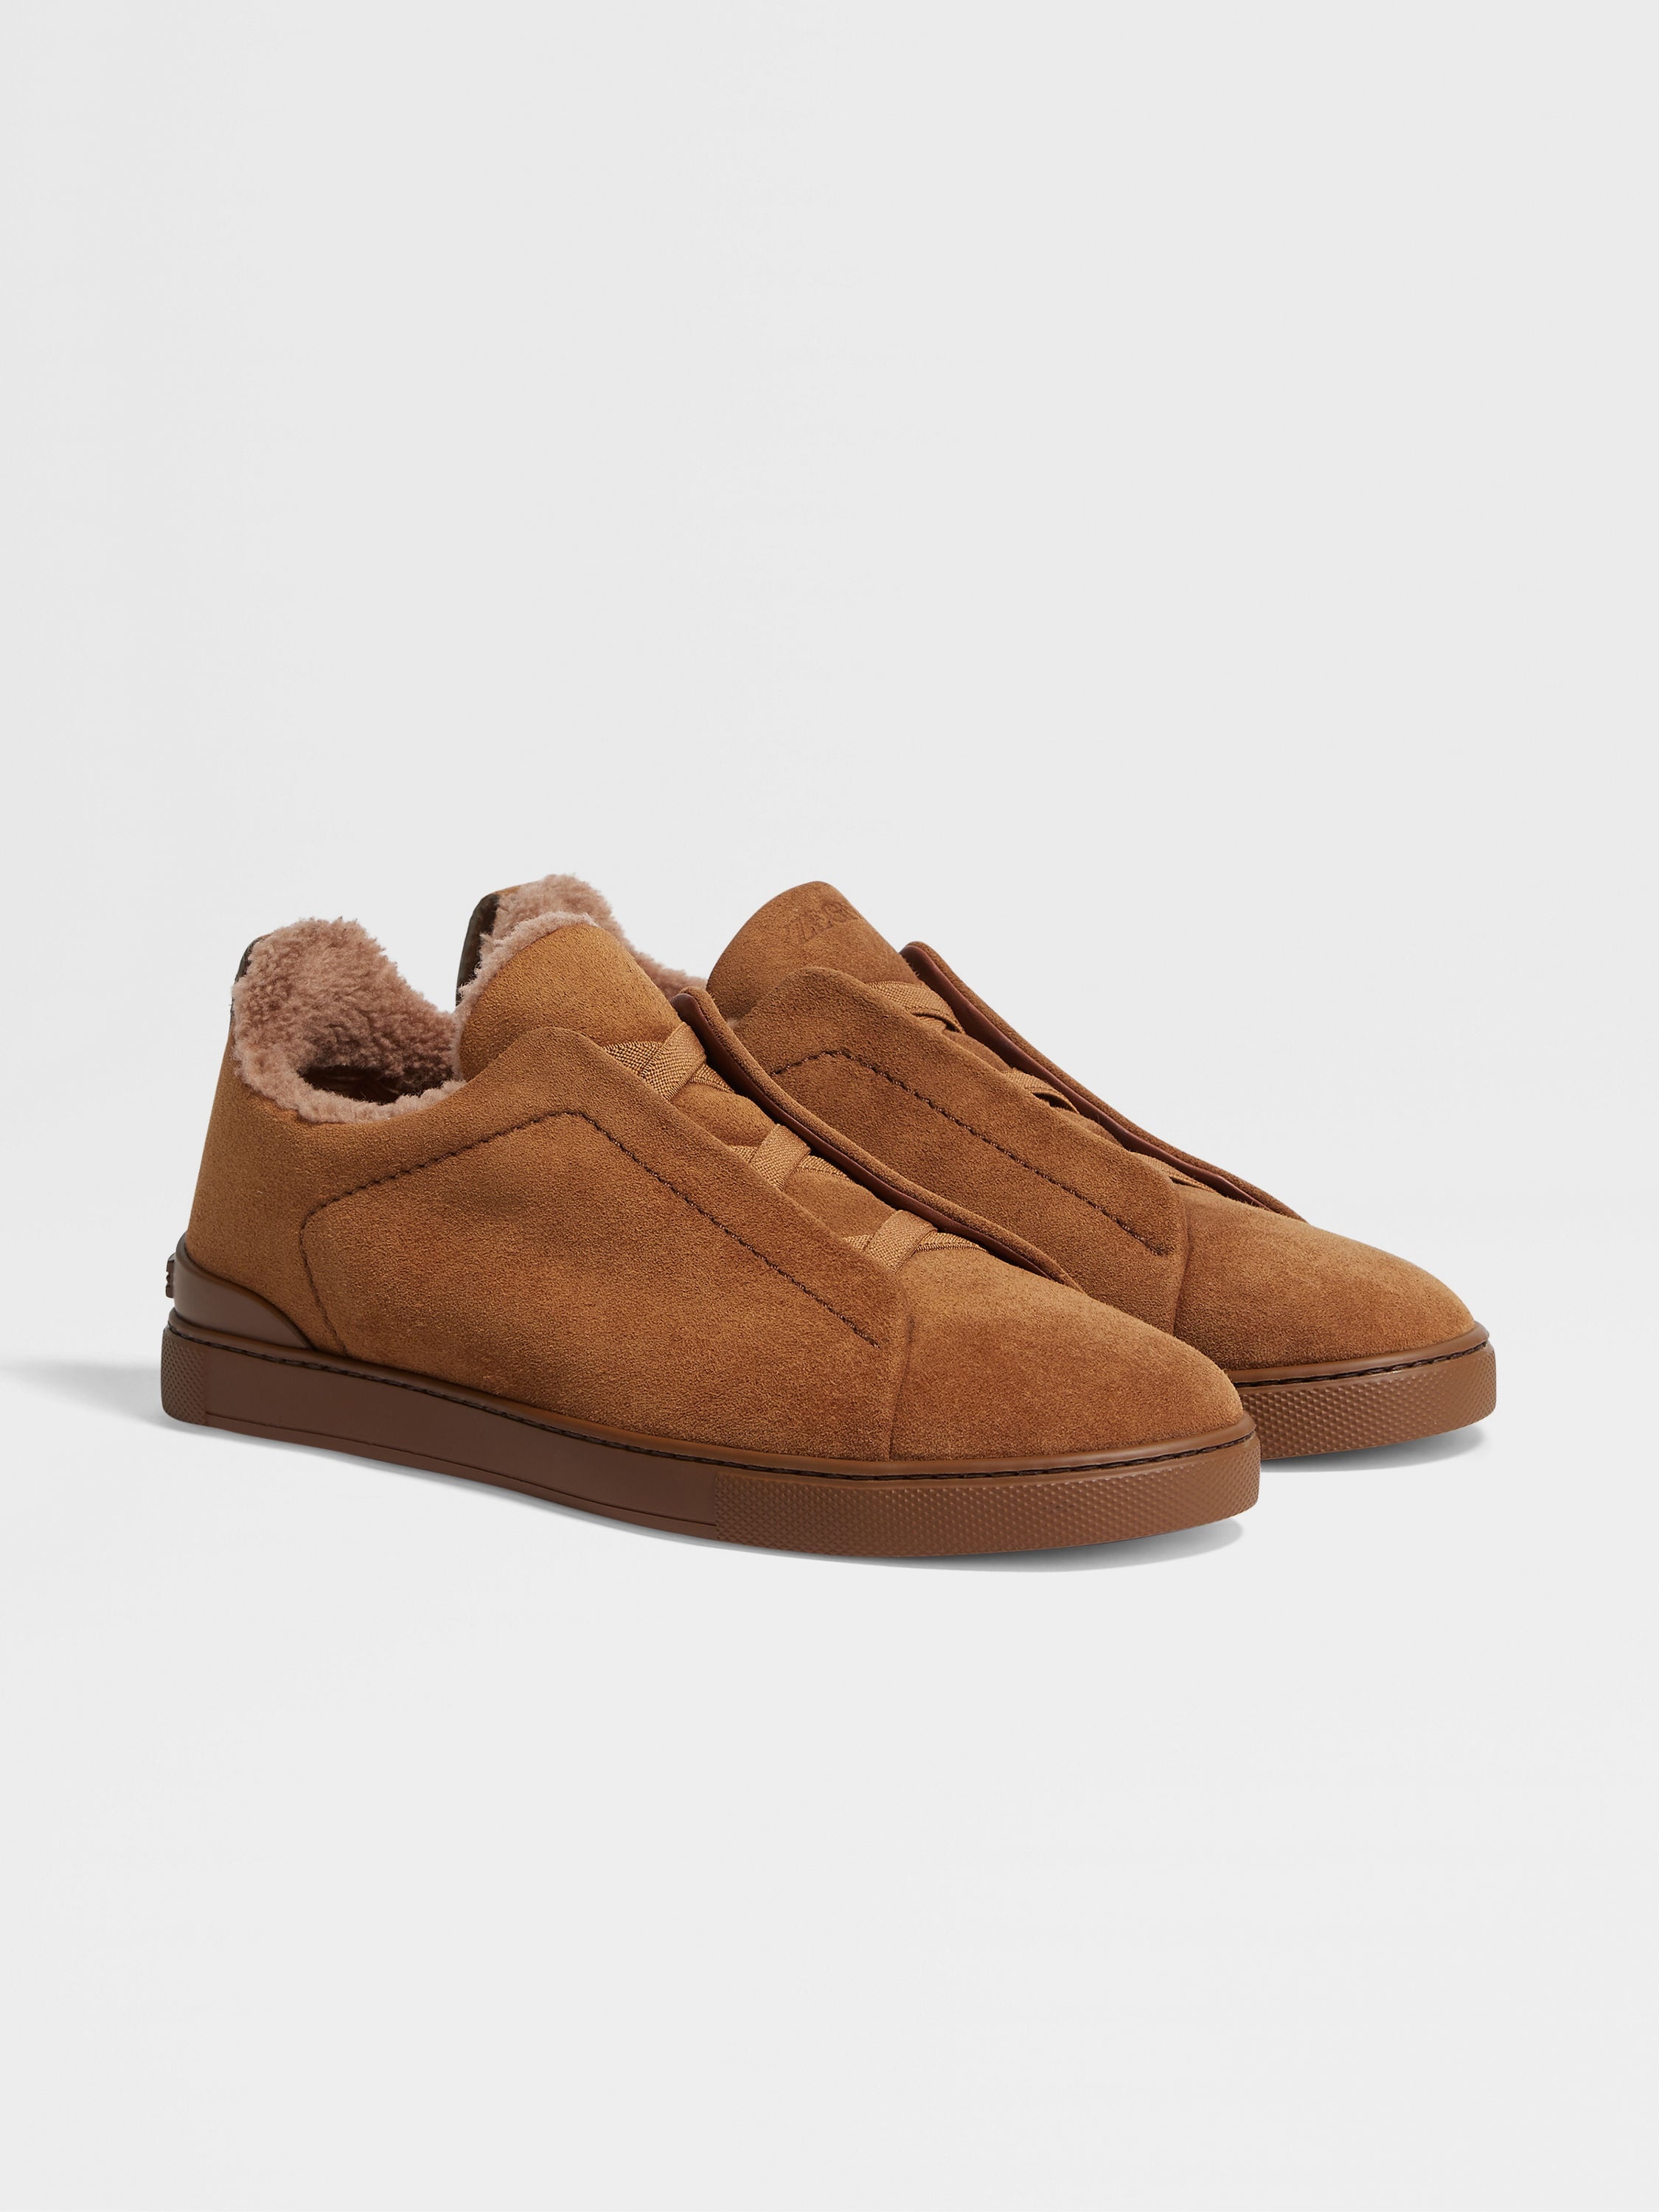 LIGHT BROWN SUEDE TRIPLE STITCH™ SNEAKERS - 1